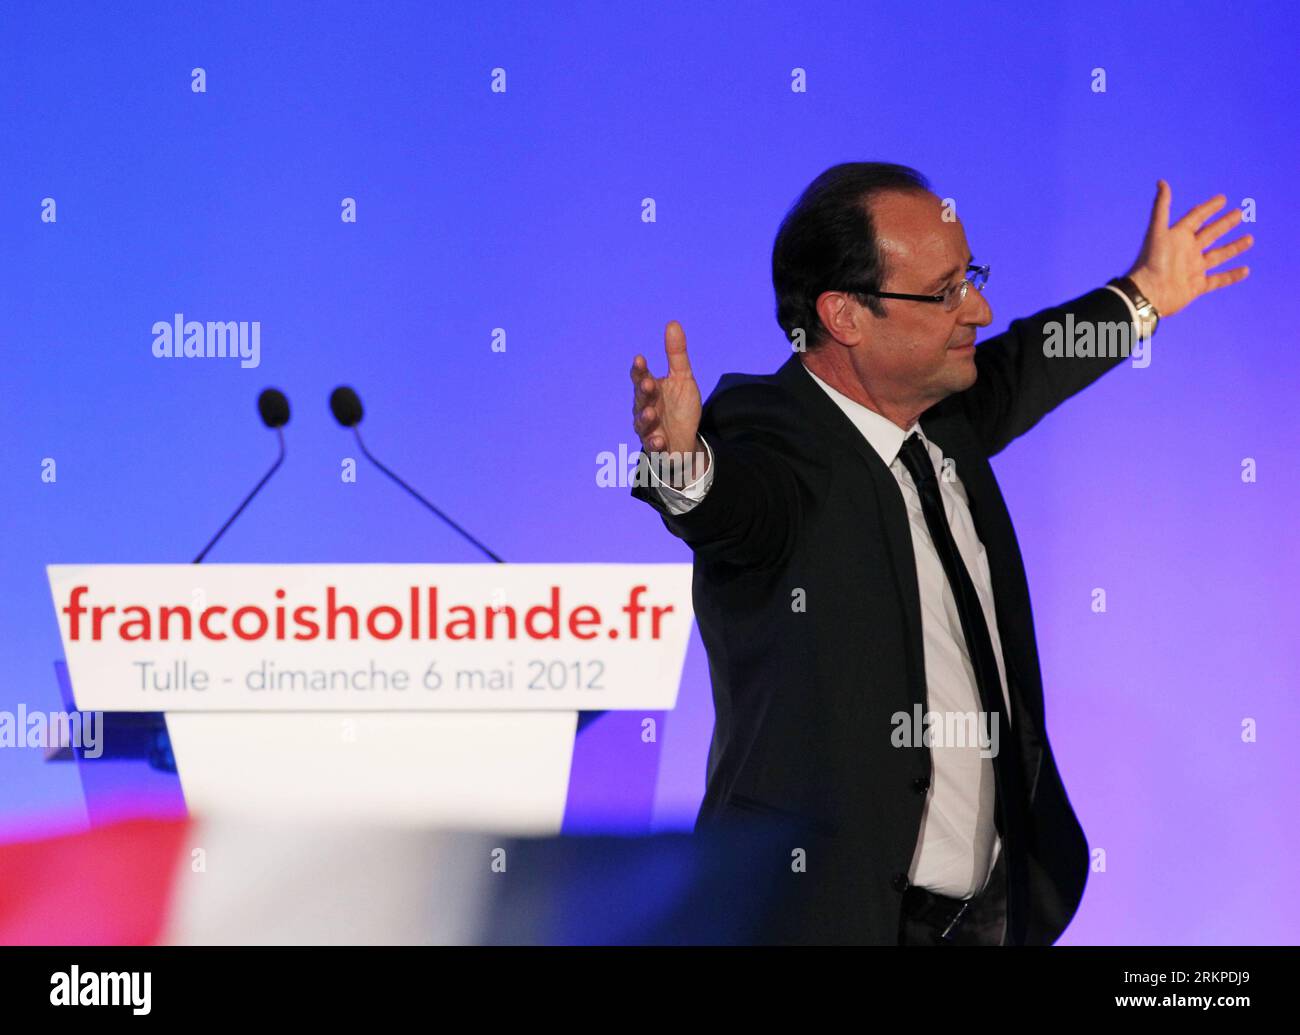 Bildnummer: 57962367  Datum: 06.05.2012  Copyright: imago/Xinhua (120506) -- TULLE, May 6, 2012 (Xinhua) -- France s Socialist Party s candidate Francois Hollande gestures to his supporters during a rally after he defeated incumbent French President Nicolas Sarkozy in Sunday s decisive presidential runoff, in Tulle, southern France, May 6, 2012. Francois Hollande said he feels proud of bringing hope to France and that change will start from now in an address to his supporters on Sunday night after the presidential election. (Xinhua/Gao Jing) (zx) FRANCE-TULLE-HOLLANDE-VICTORY PUBLICATIONxNOTxI Stock Photo